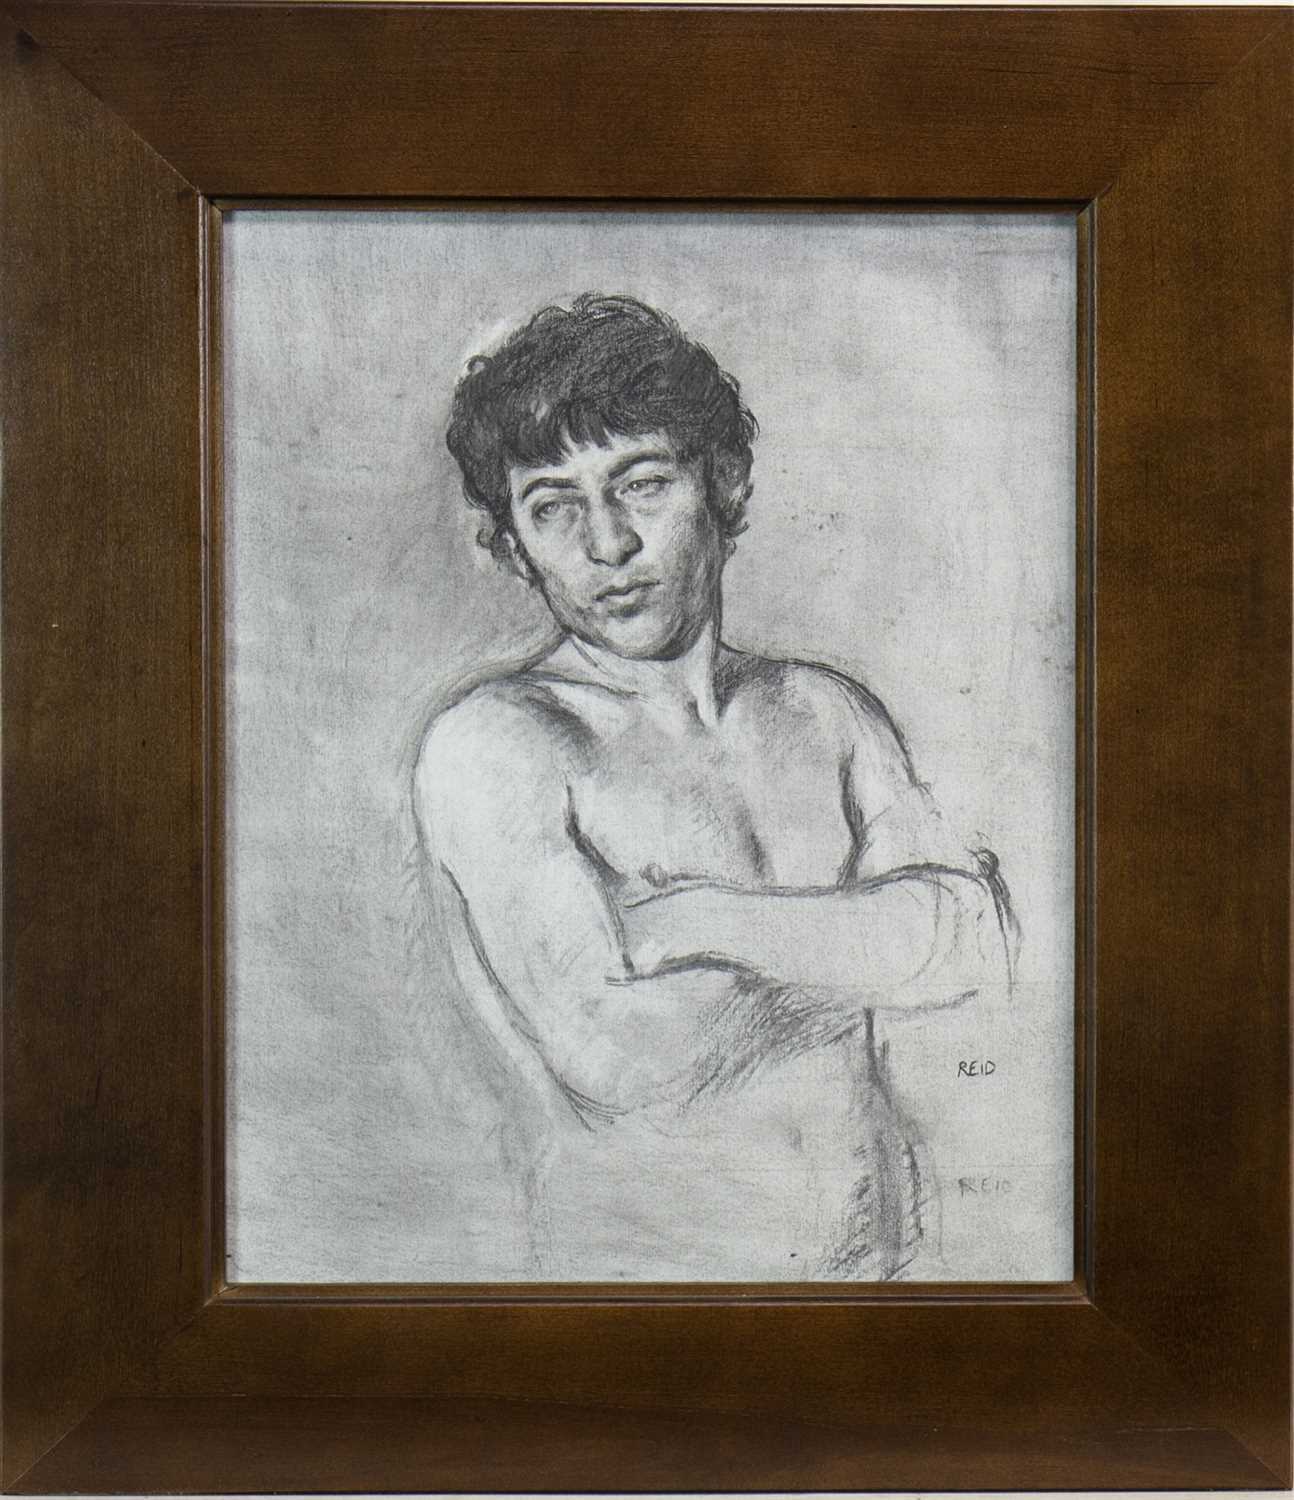 Lot 569 - MALE NUDE - ARMS FOLDED, A CHARCOAL BY PAUL REID